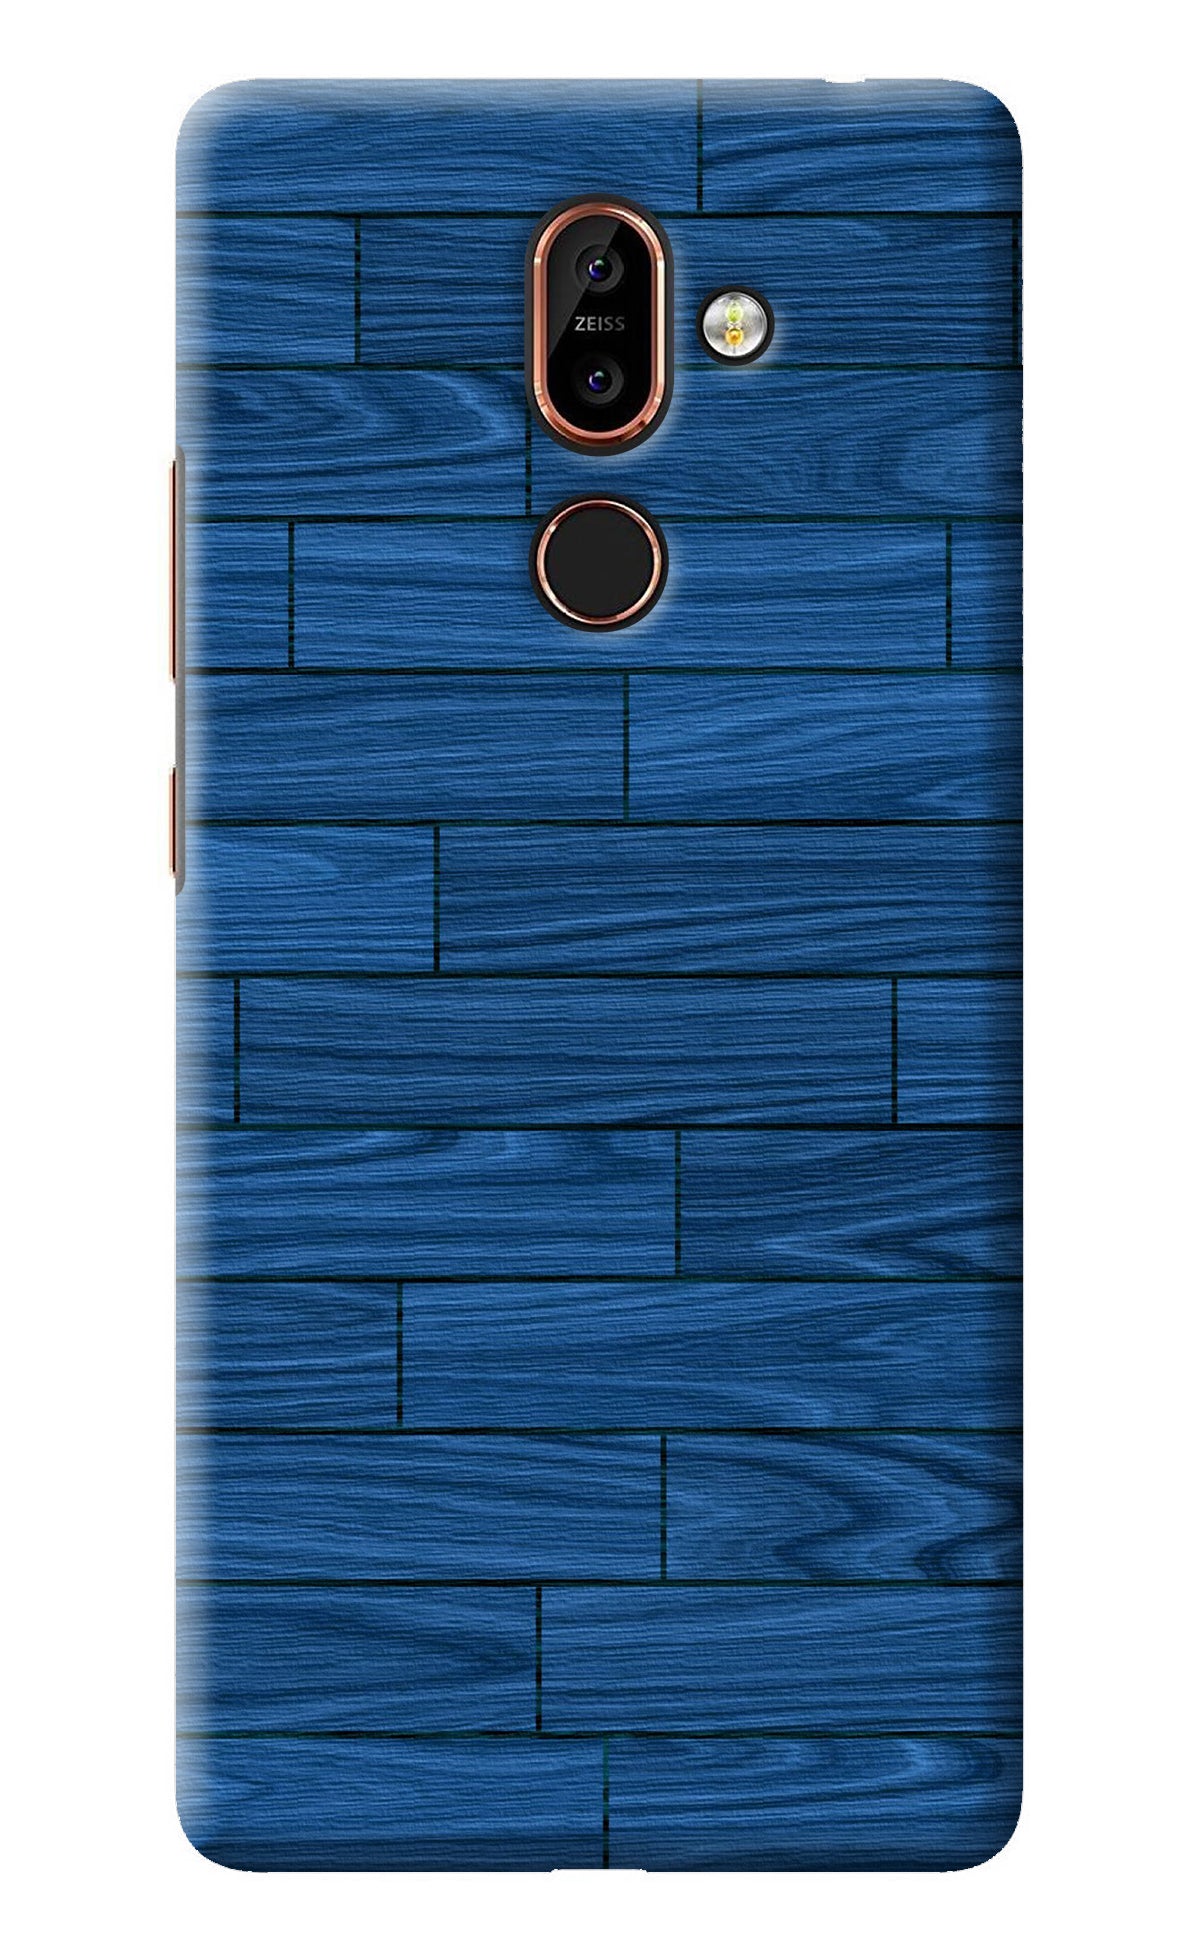 Wooden Texture Nokia 7 Plus Back Cover